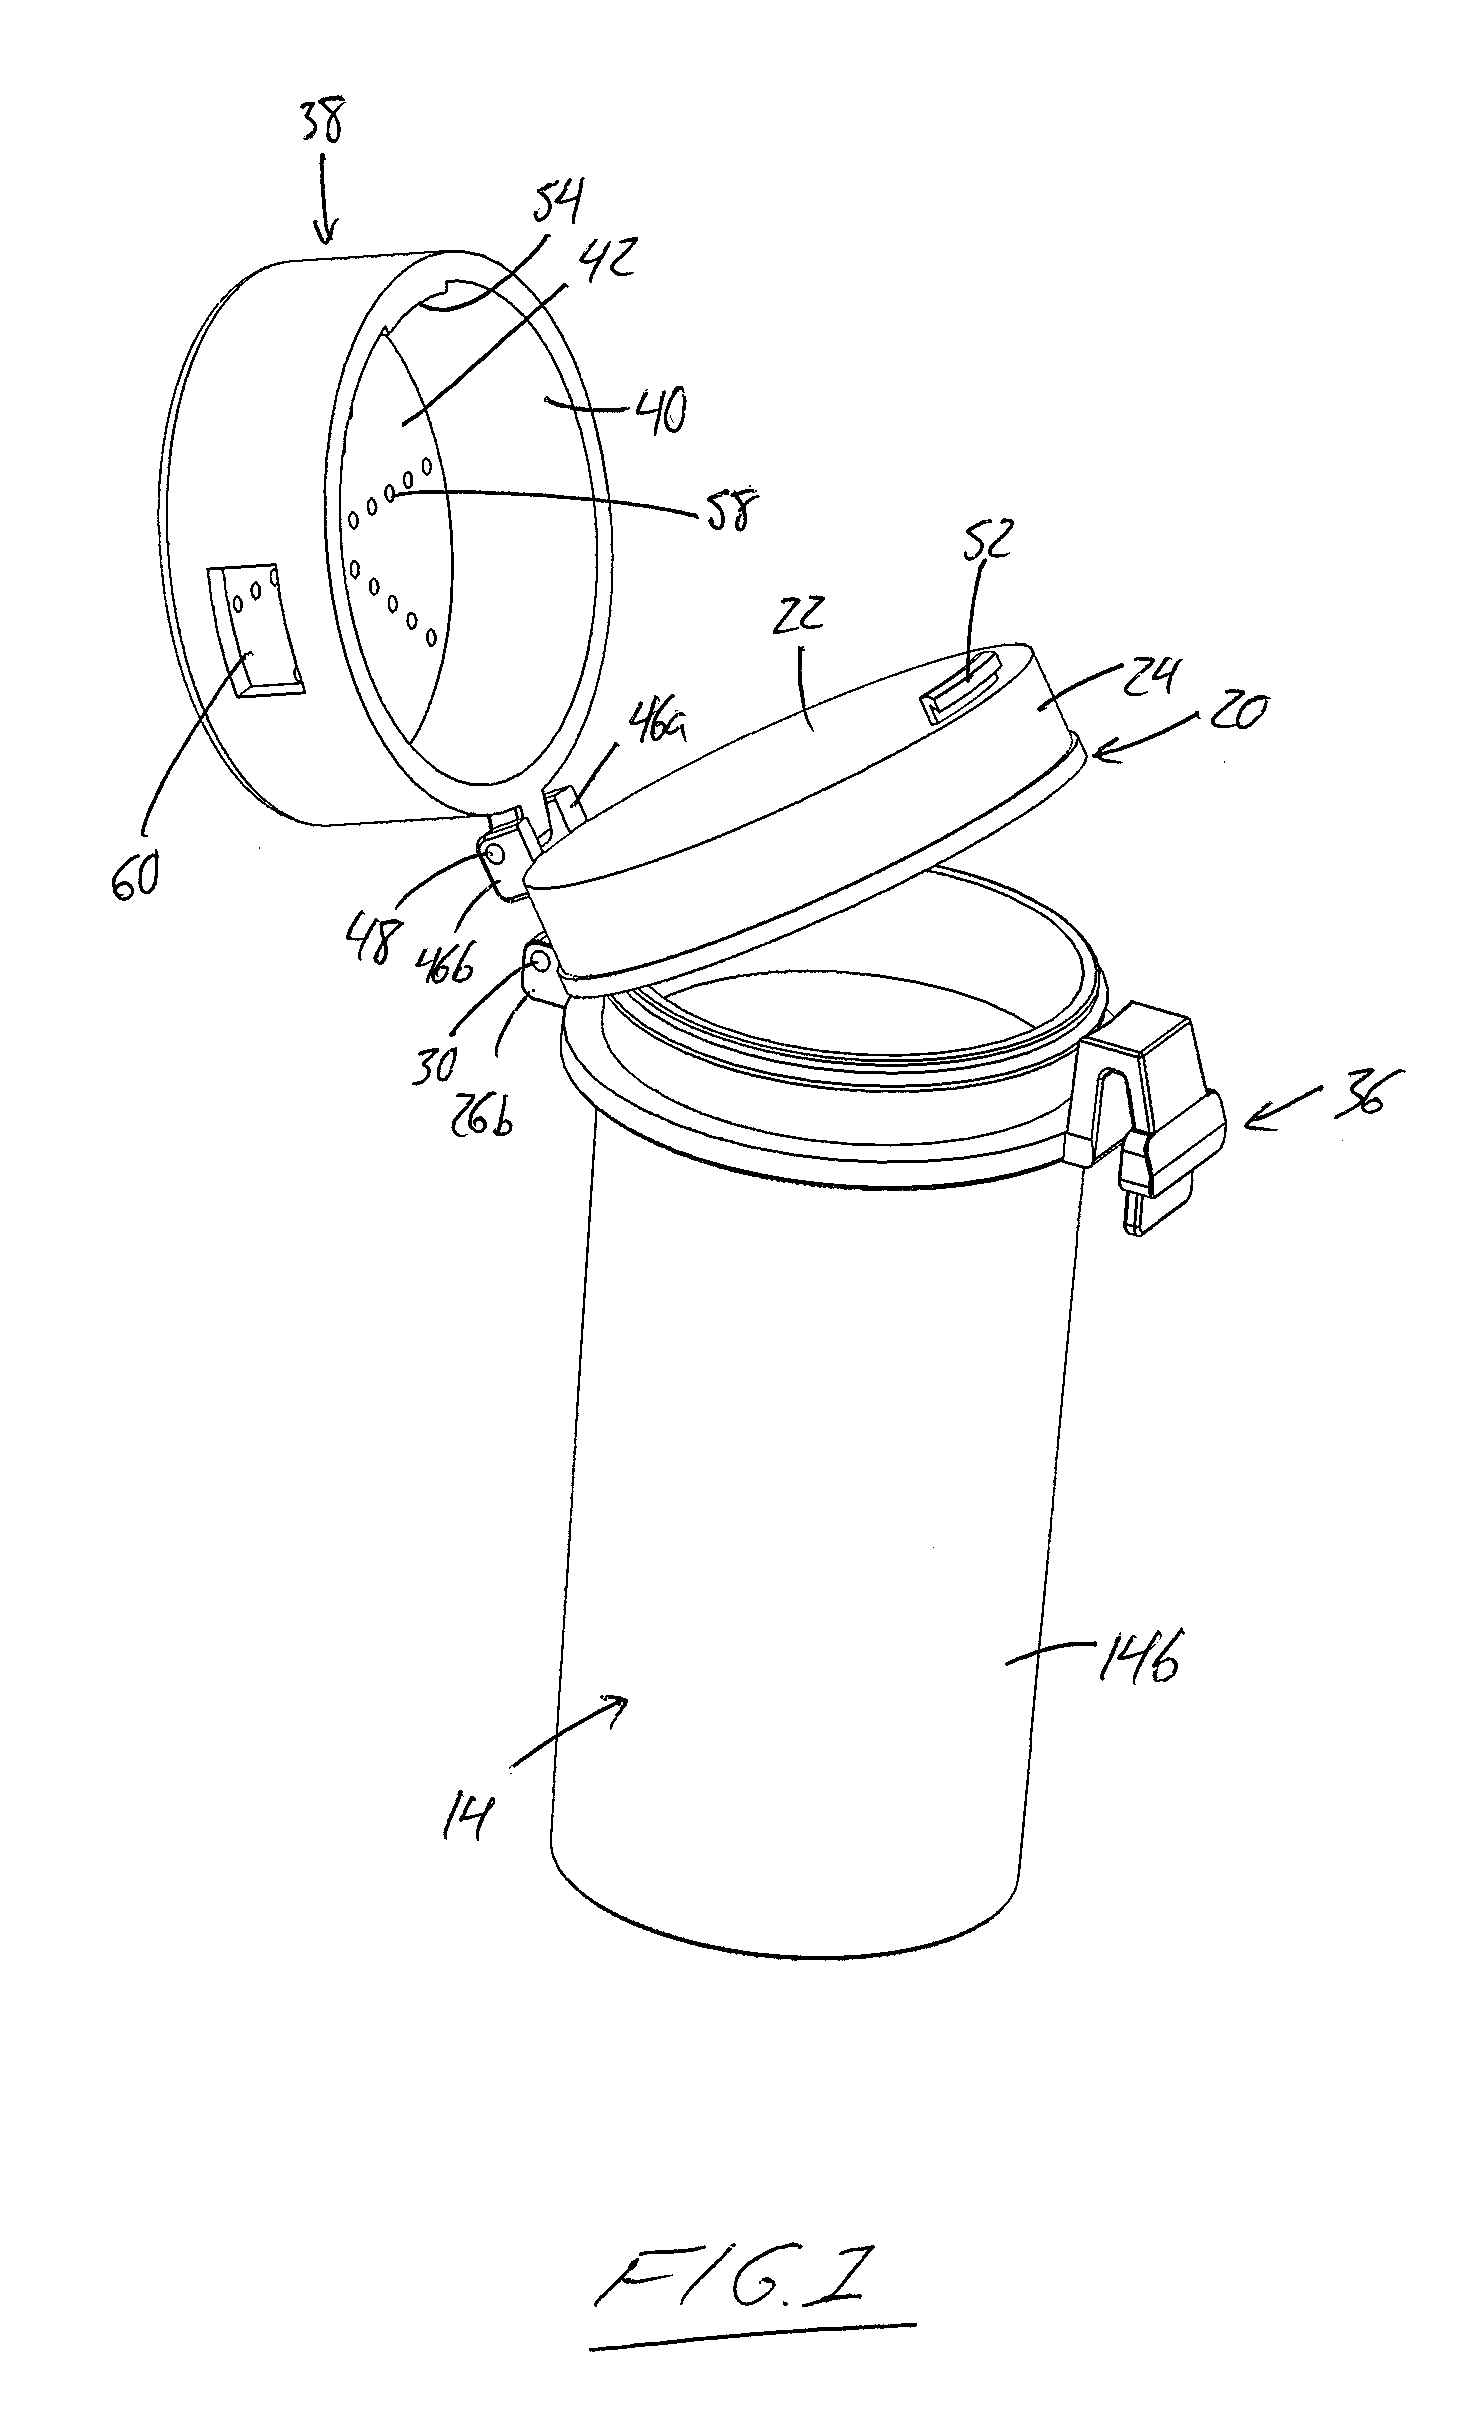 Pill Bottle Lid Incorporating Audible Messaging Device, and Pairing Thereof with External Devices for Dosage Reminder and Conflict Checking Purposes